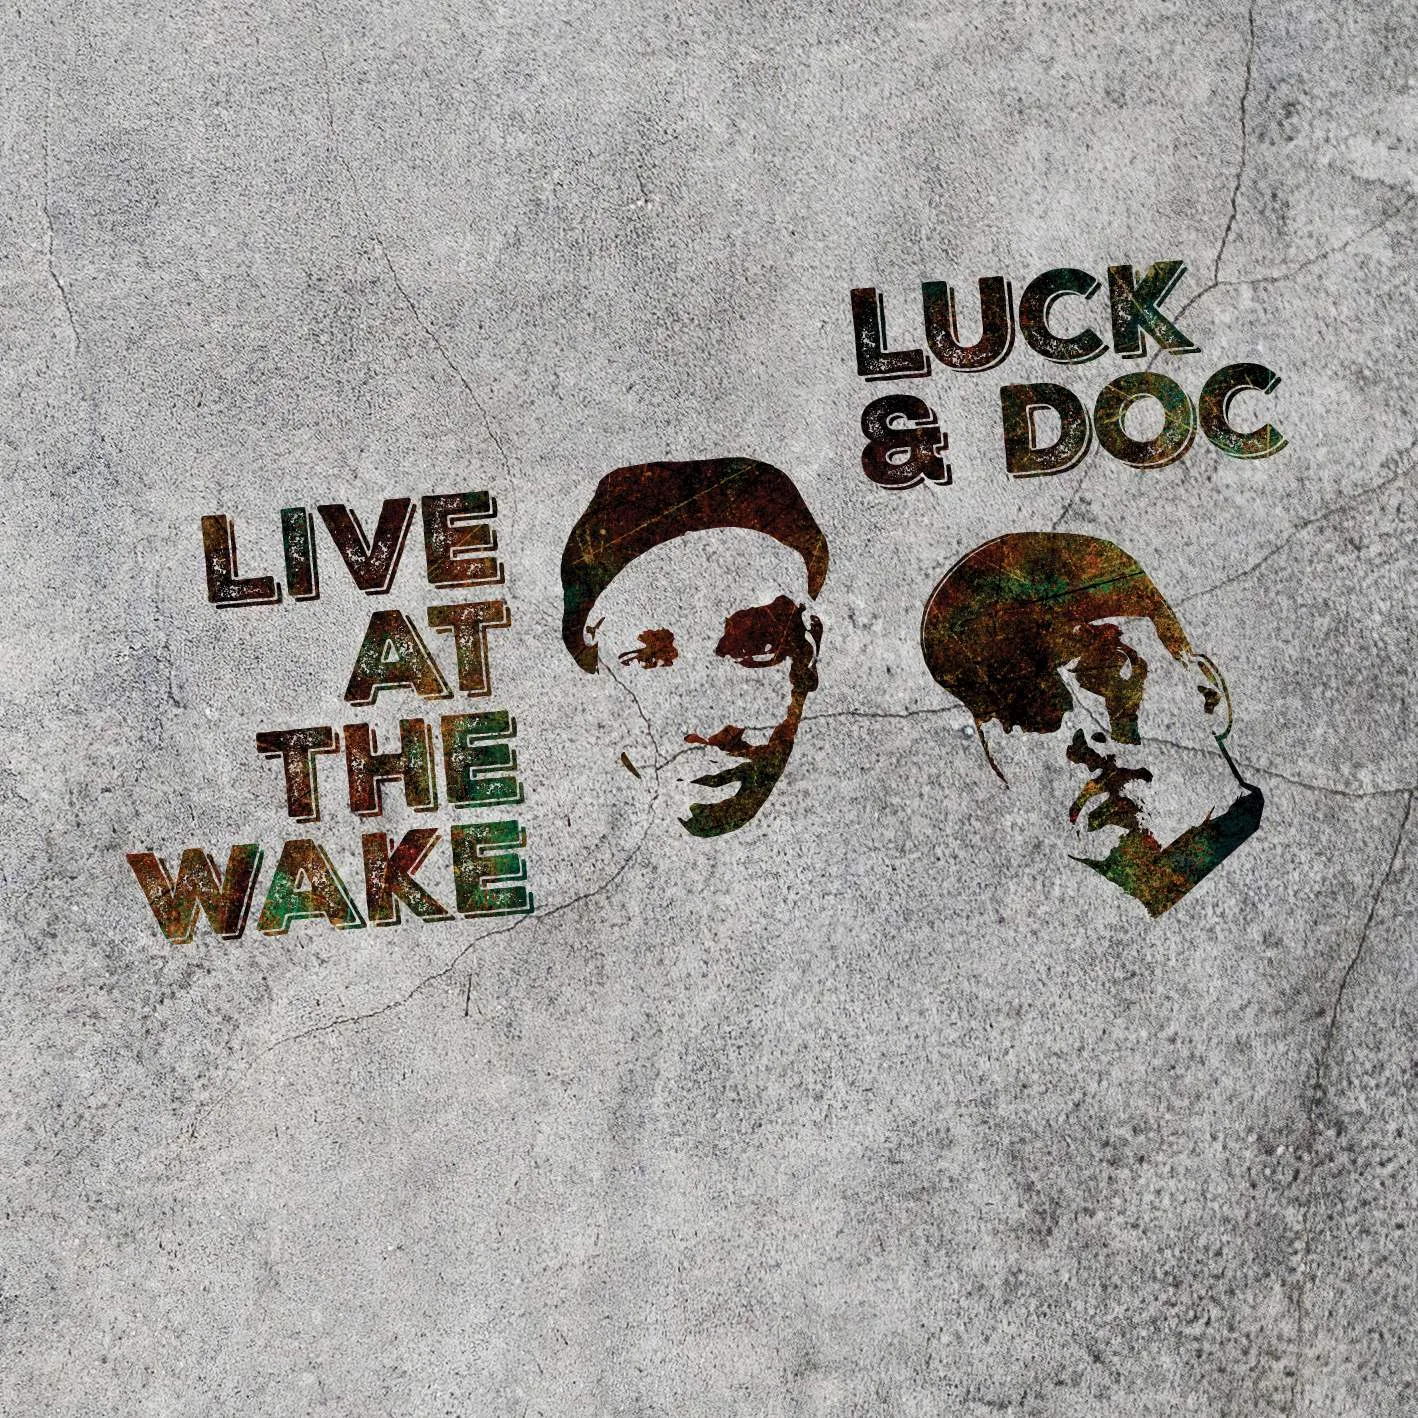 Album cover for “Live At The Wake” by Luck &amp; Doc